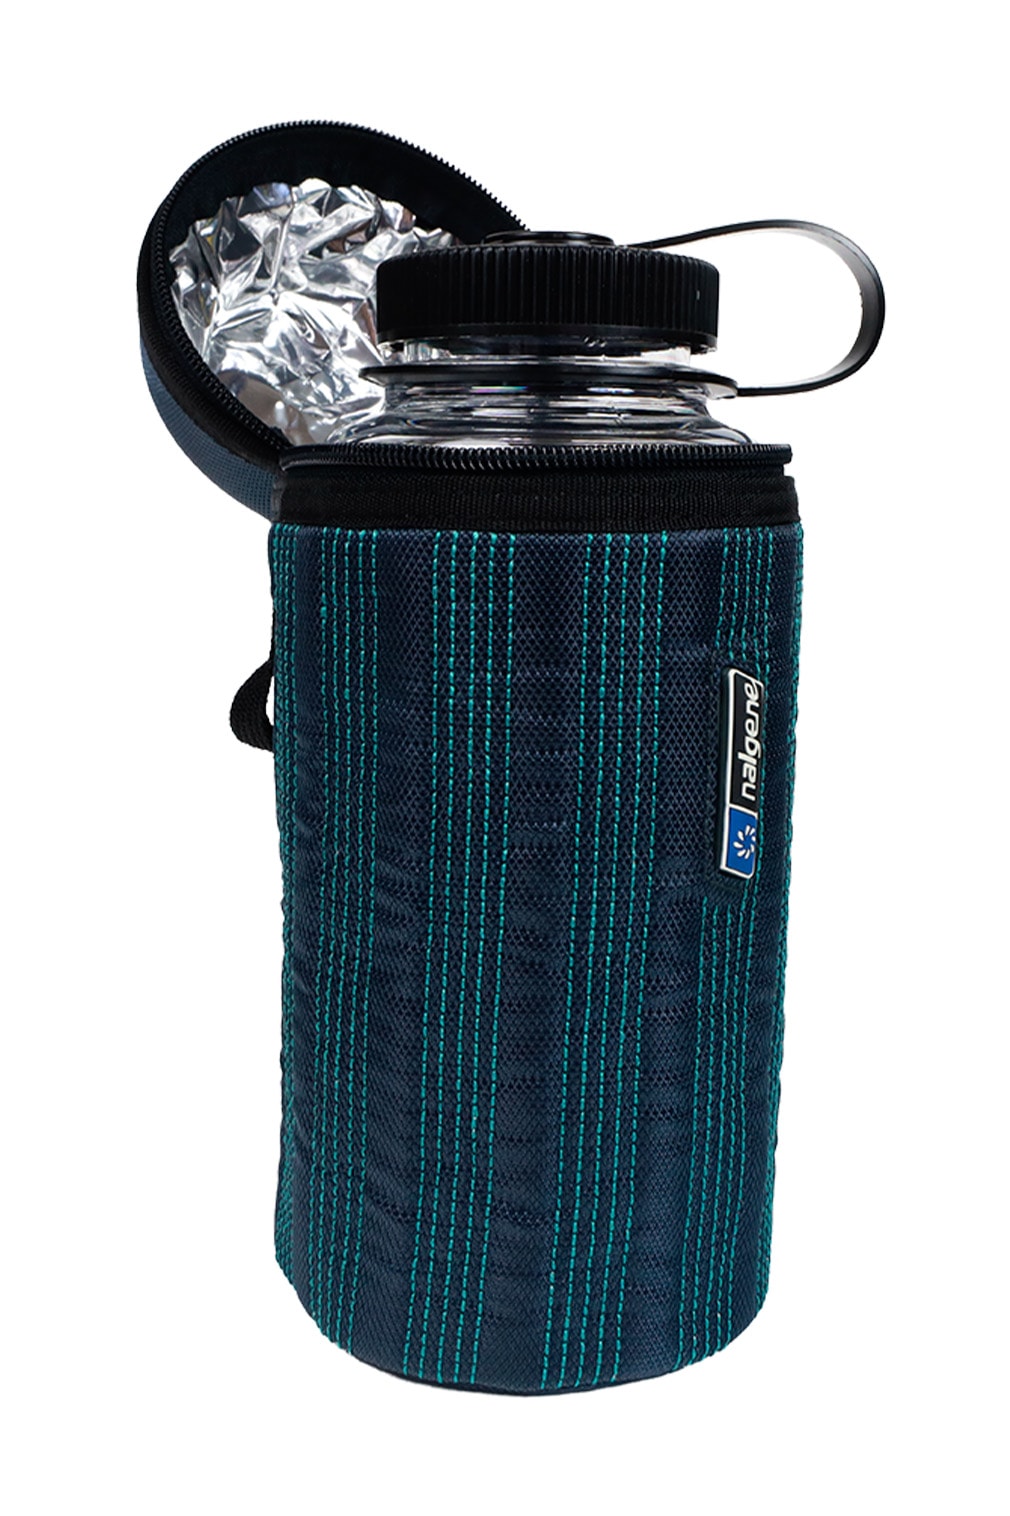 Baribal Insulated Tactical Pouch for Nalgene 1l Bottle